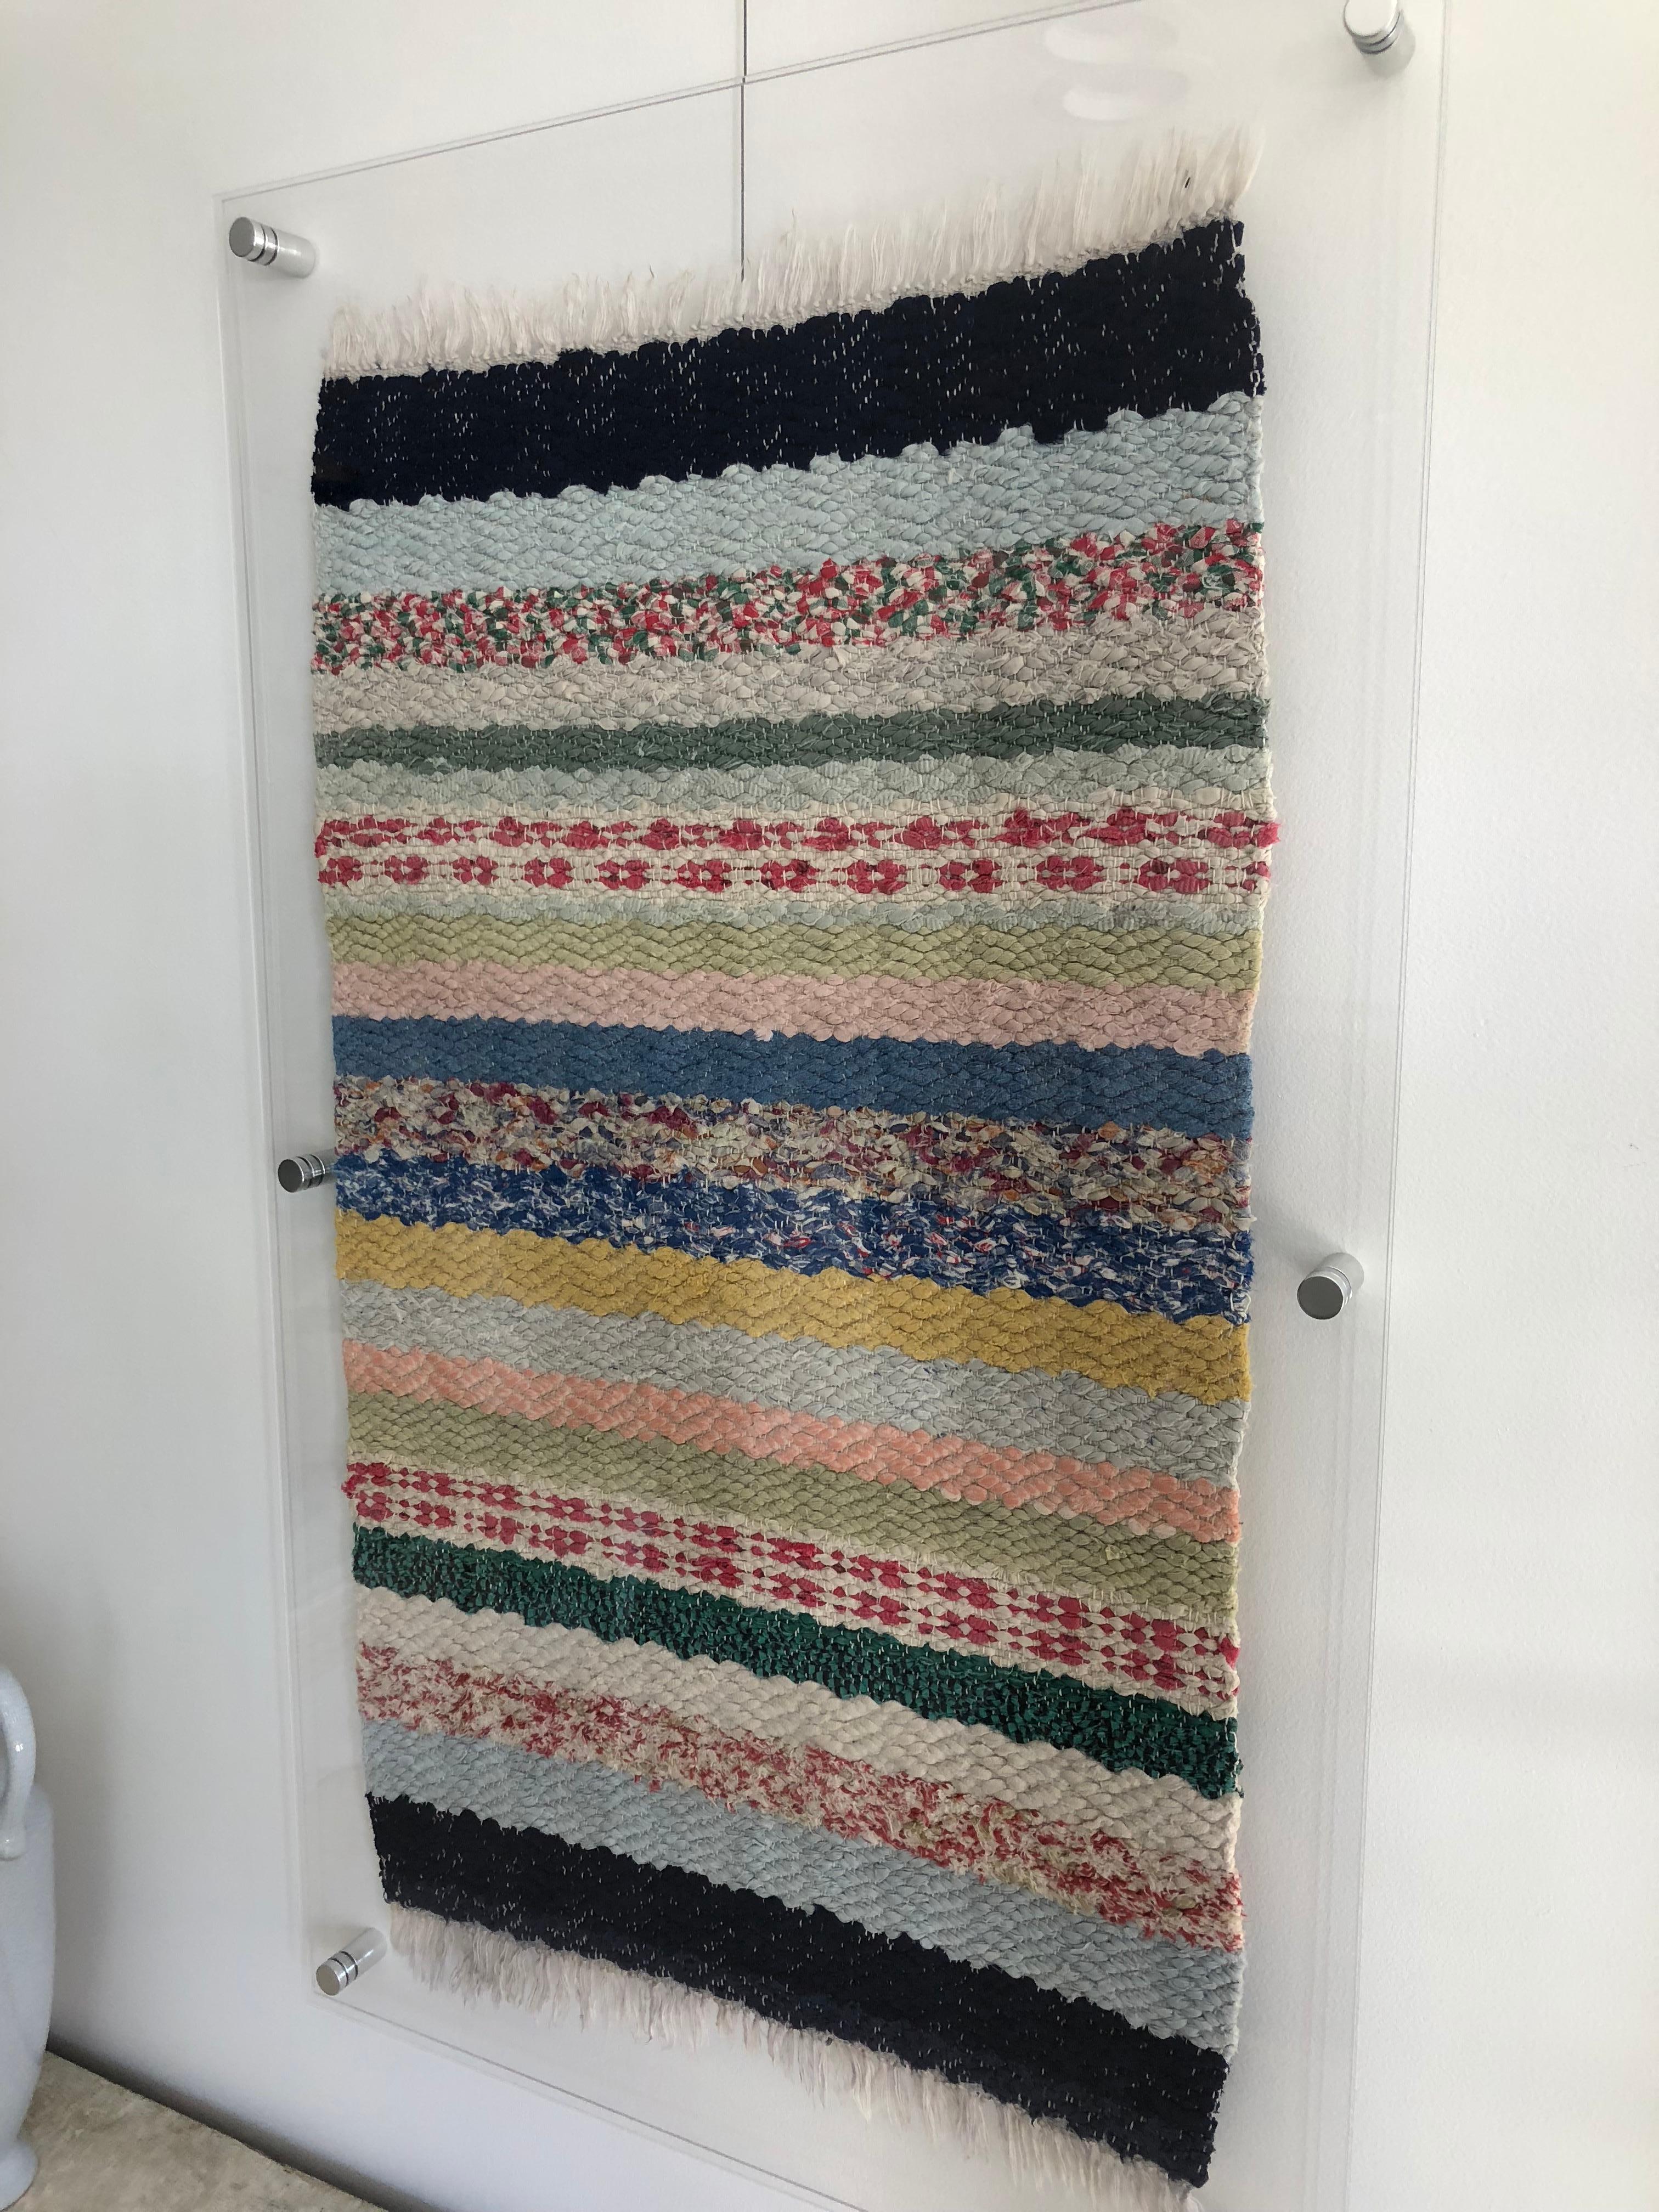 Sweet Swedish Rag Rug Cleverly Framed in Acrylic. Can be hung (wire attached) or bolted to the wall. Lovely texture, colors nicely preserved. Charming in a child room, laundry room or hallway.